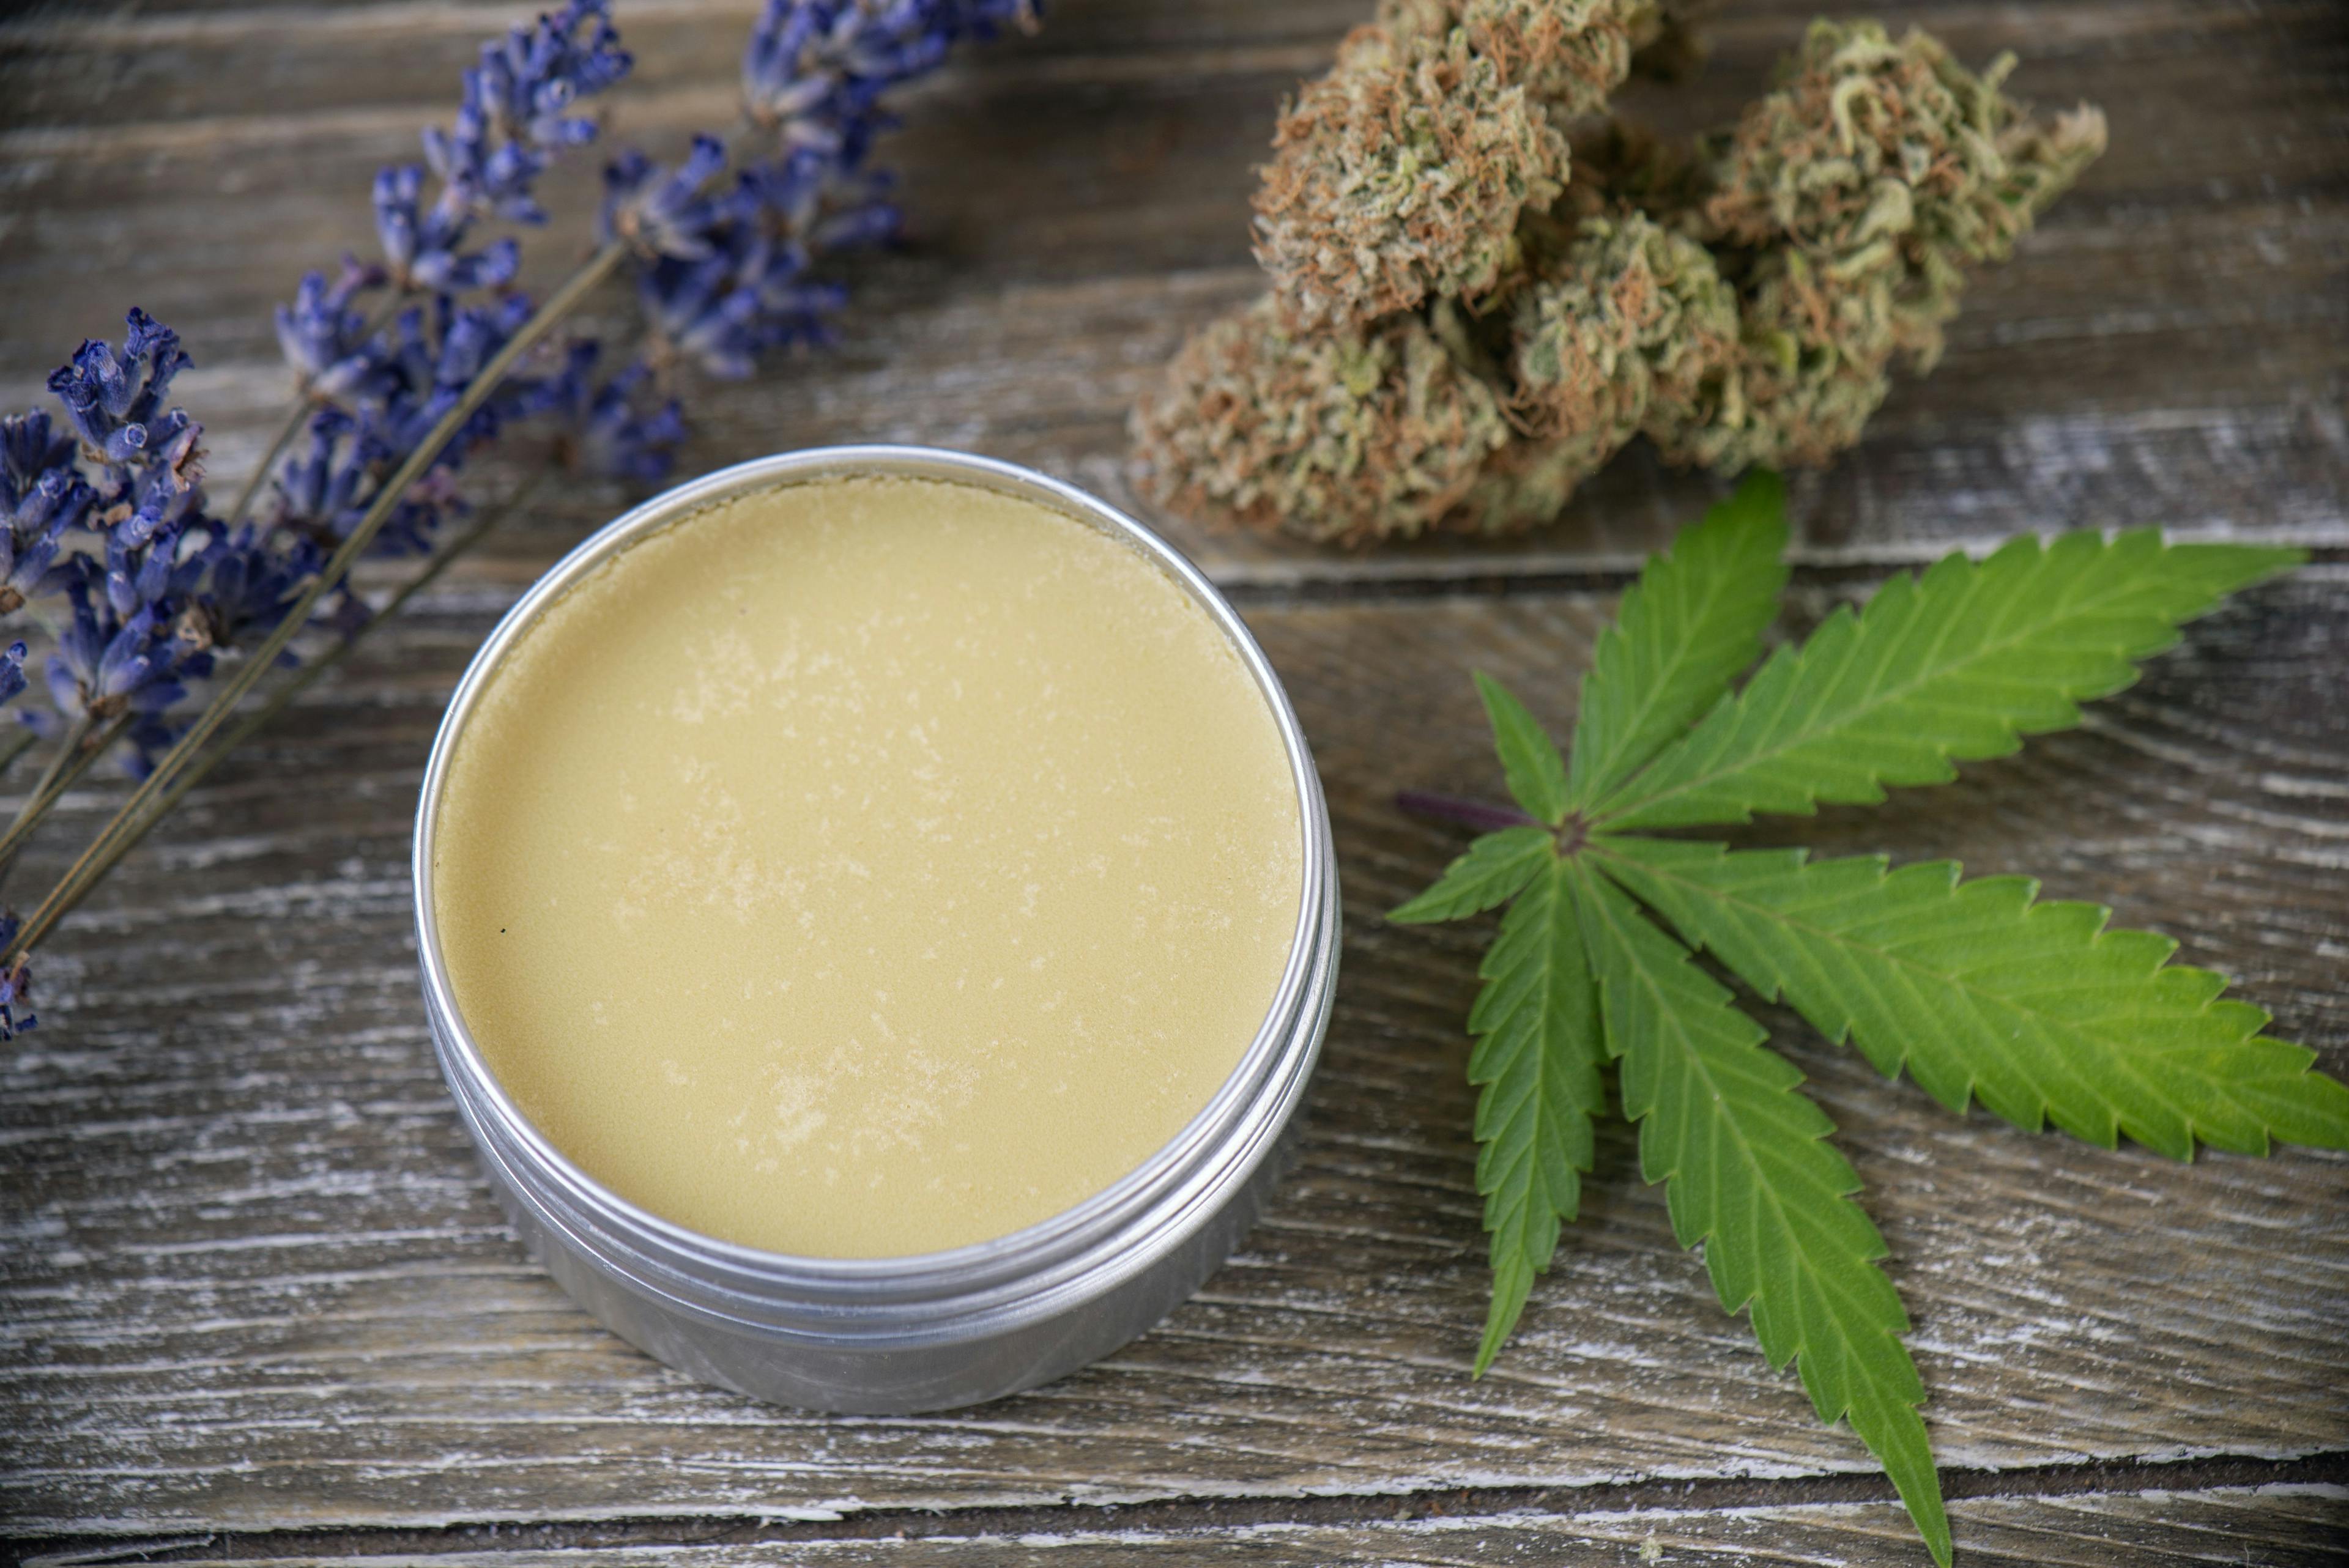 Survey: Dermatology Patients Willing to use Medical Cannabis Products